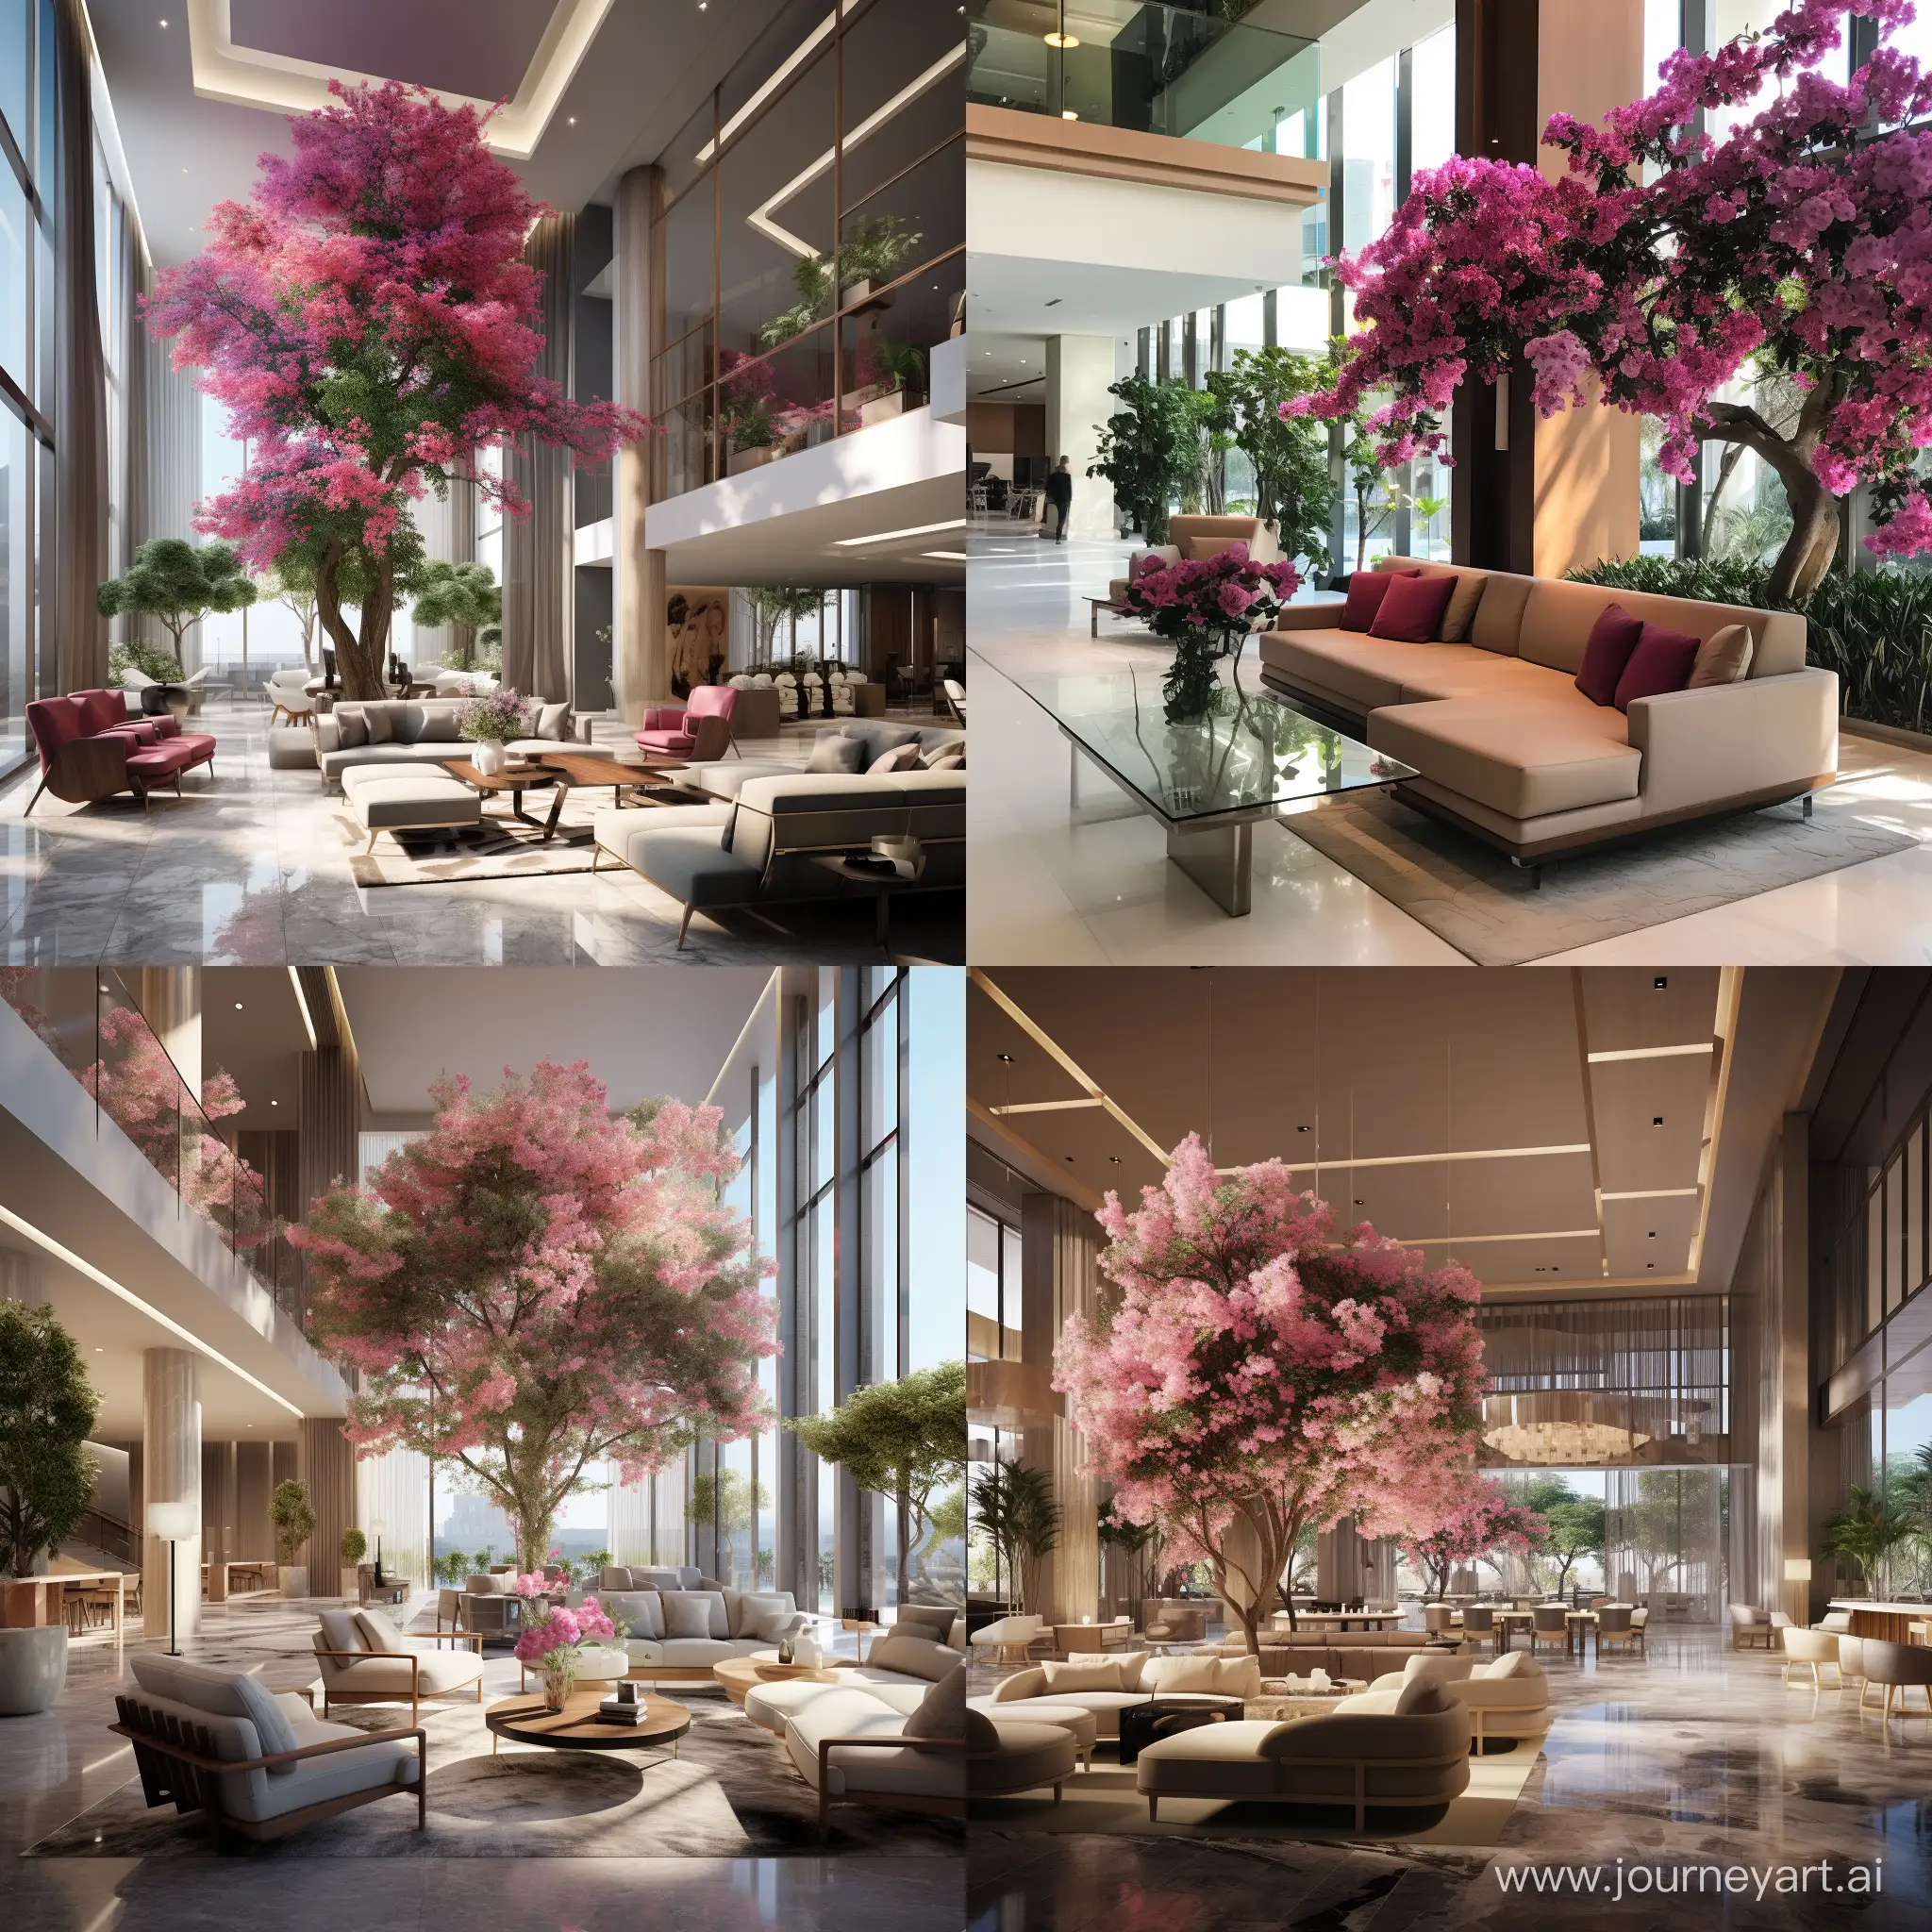 Sanyas-BougainvilleaInspired-Indoor-Office-Lobby-with-Modern-Architecture